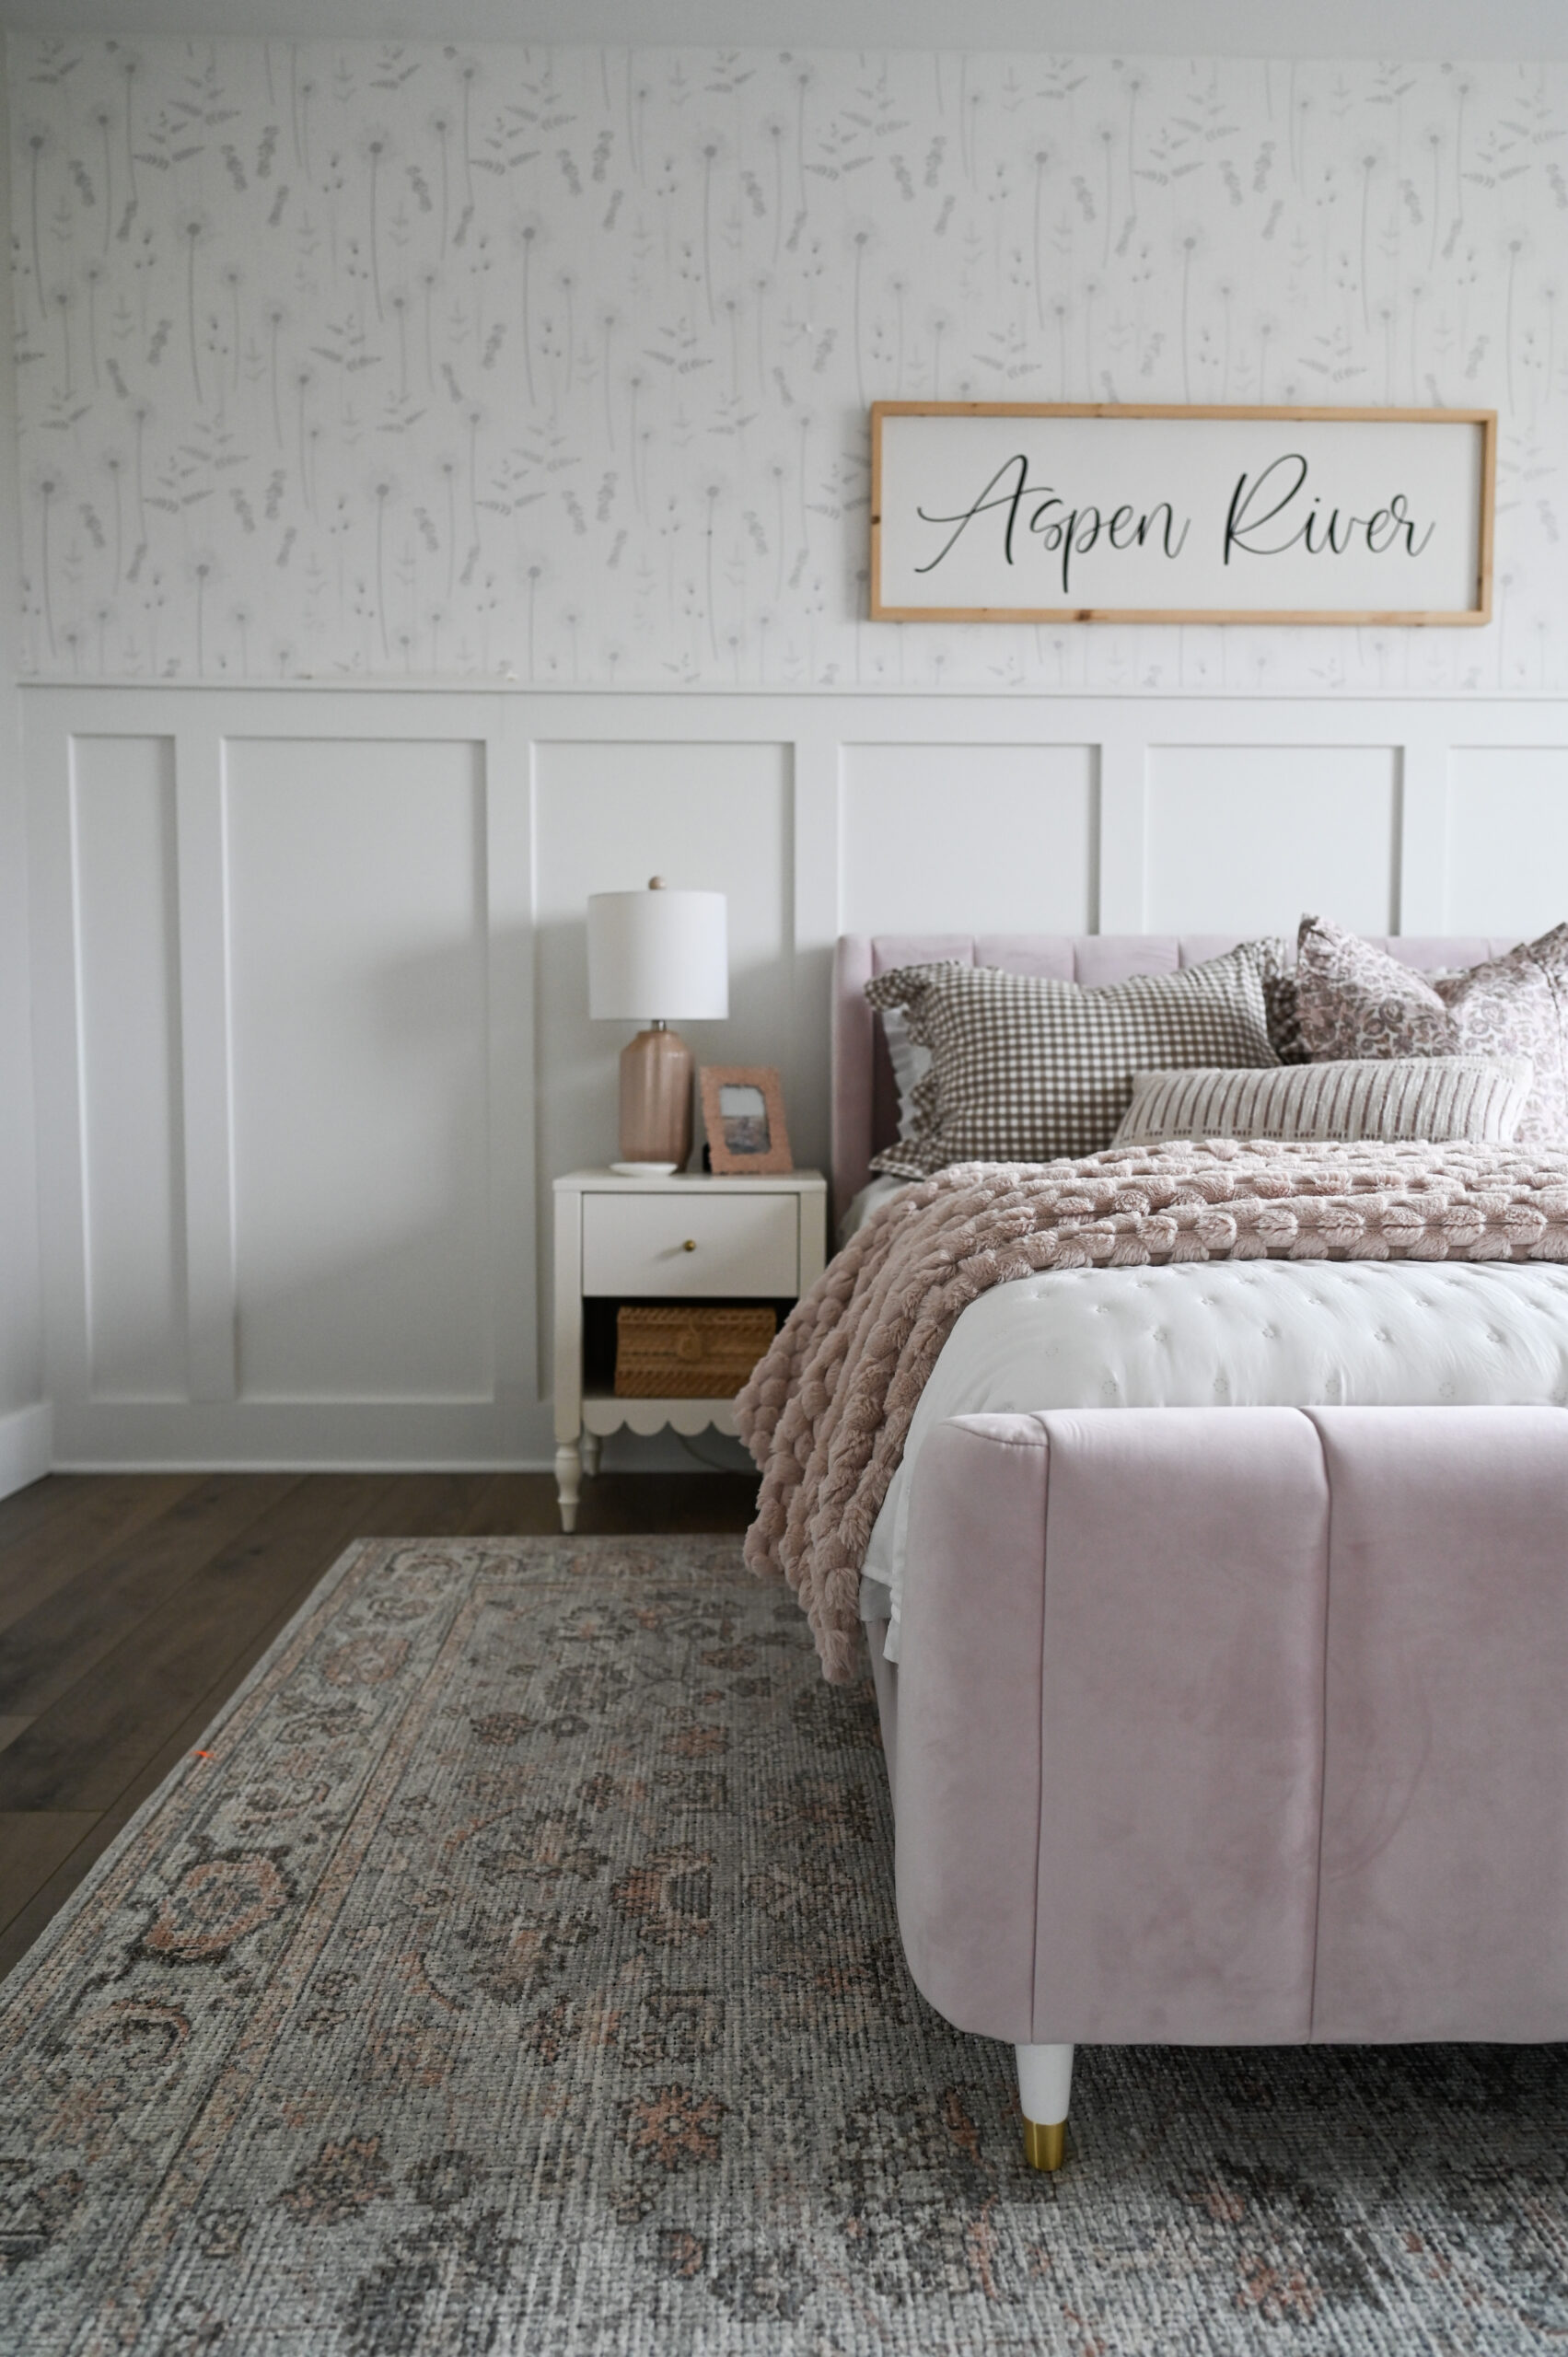 aspens room refresh pretty and pink | bedroom, room refresh, toddlers room, bed frame, toddler, kids room, wooden sign, bedding, wall paper, accent decor